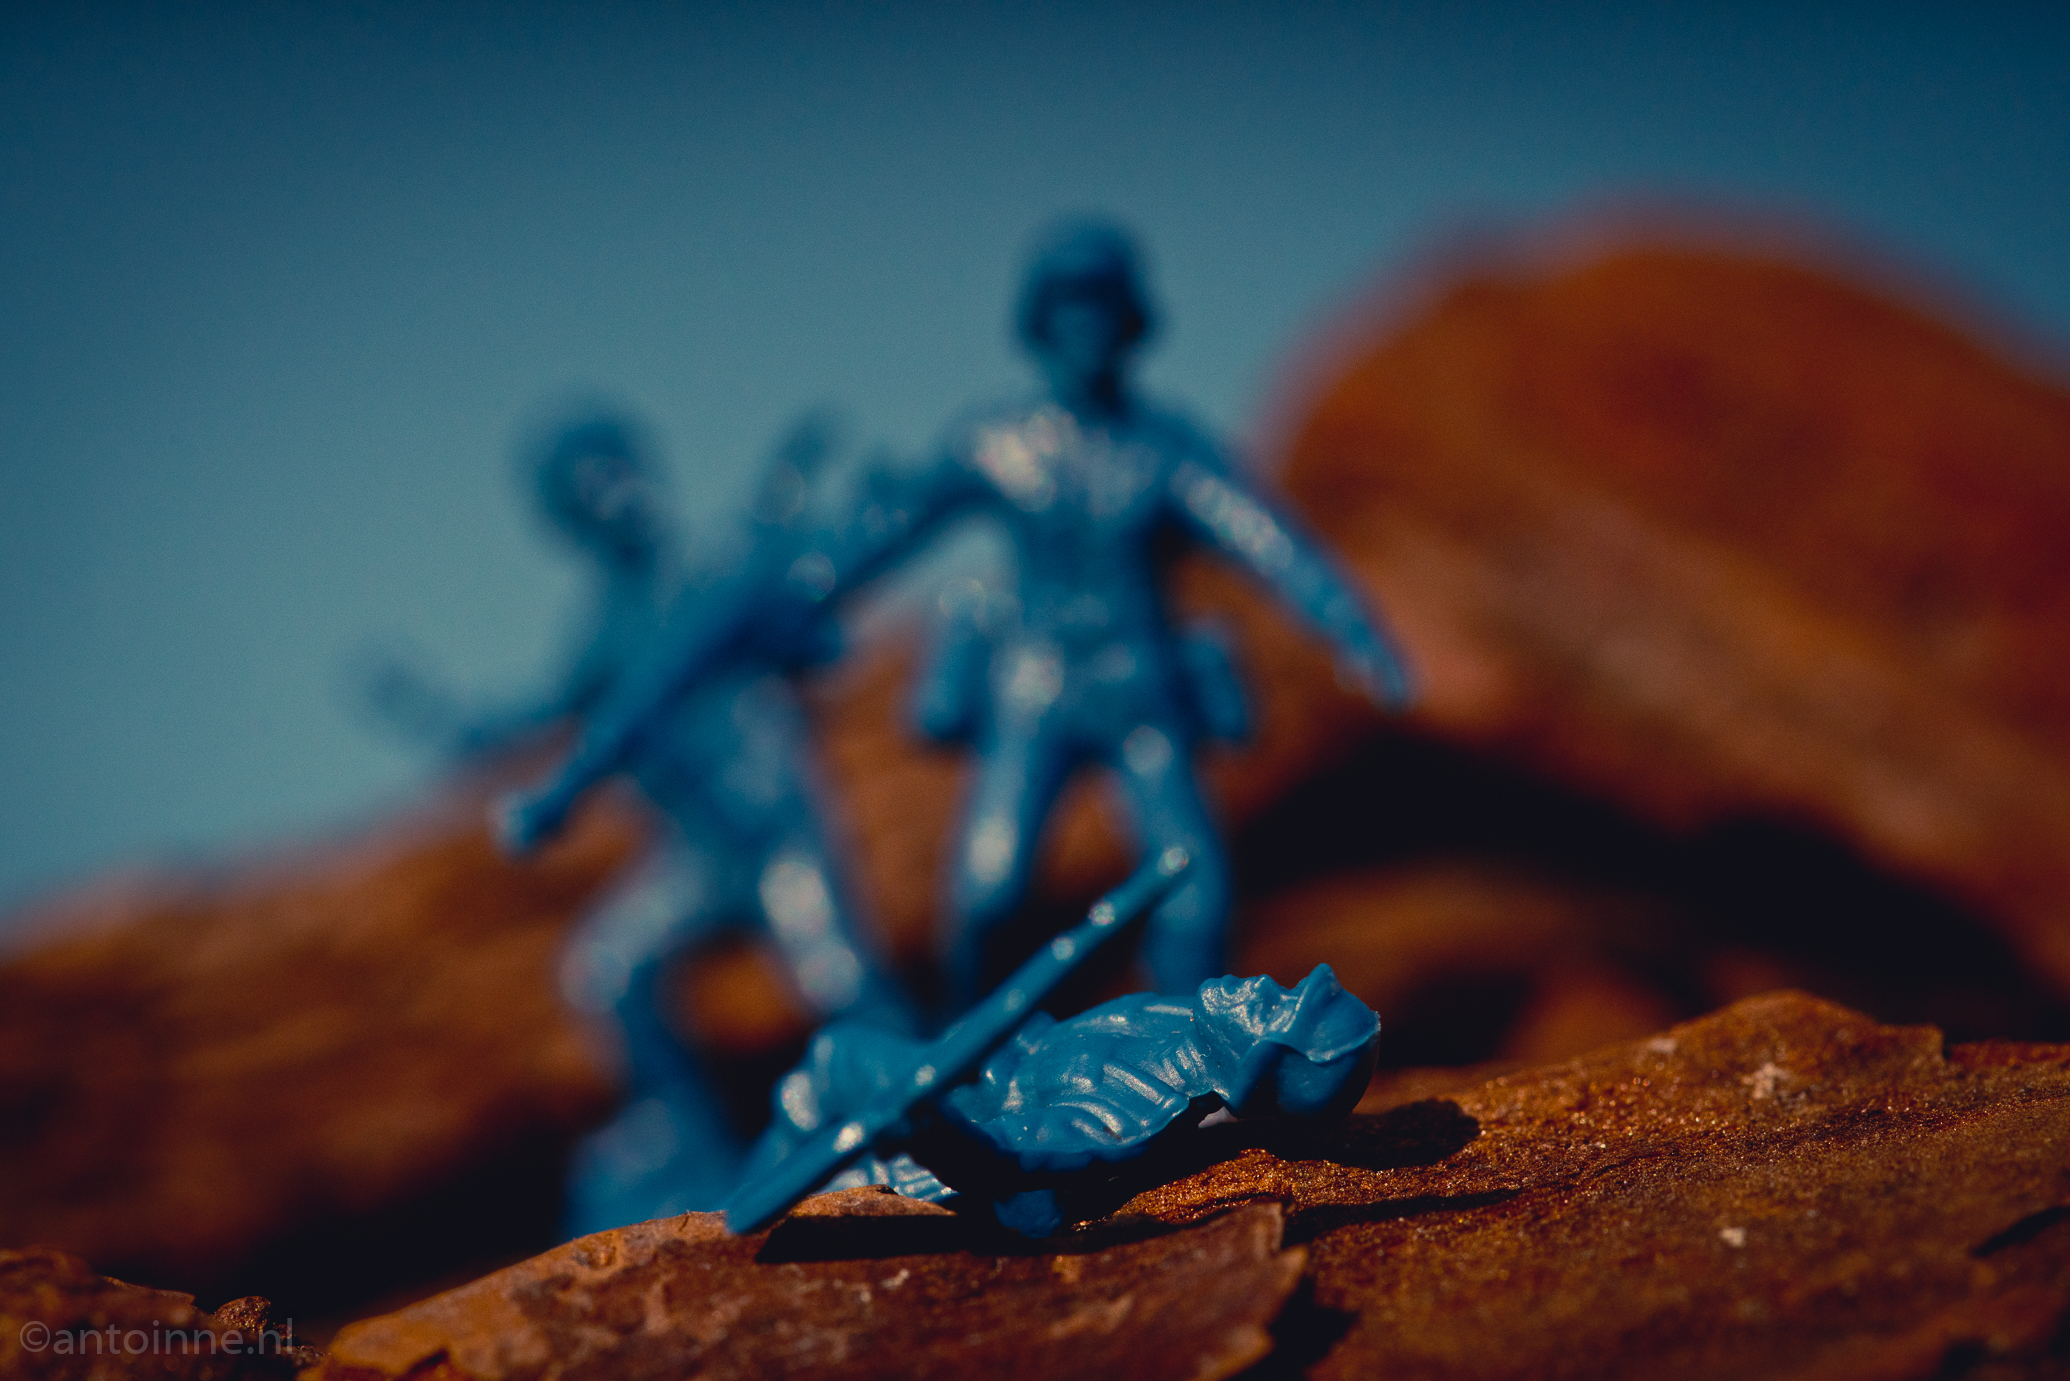 Army men, one down